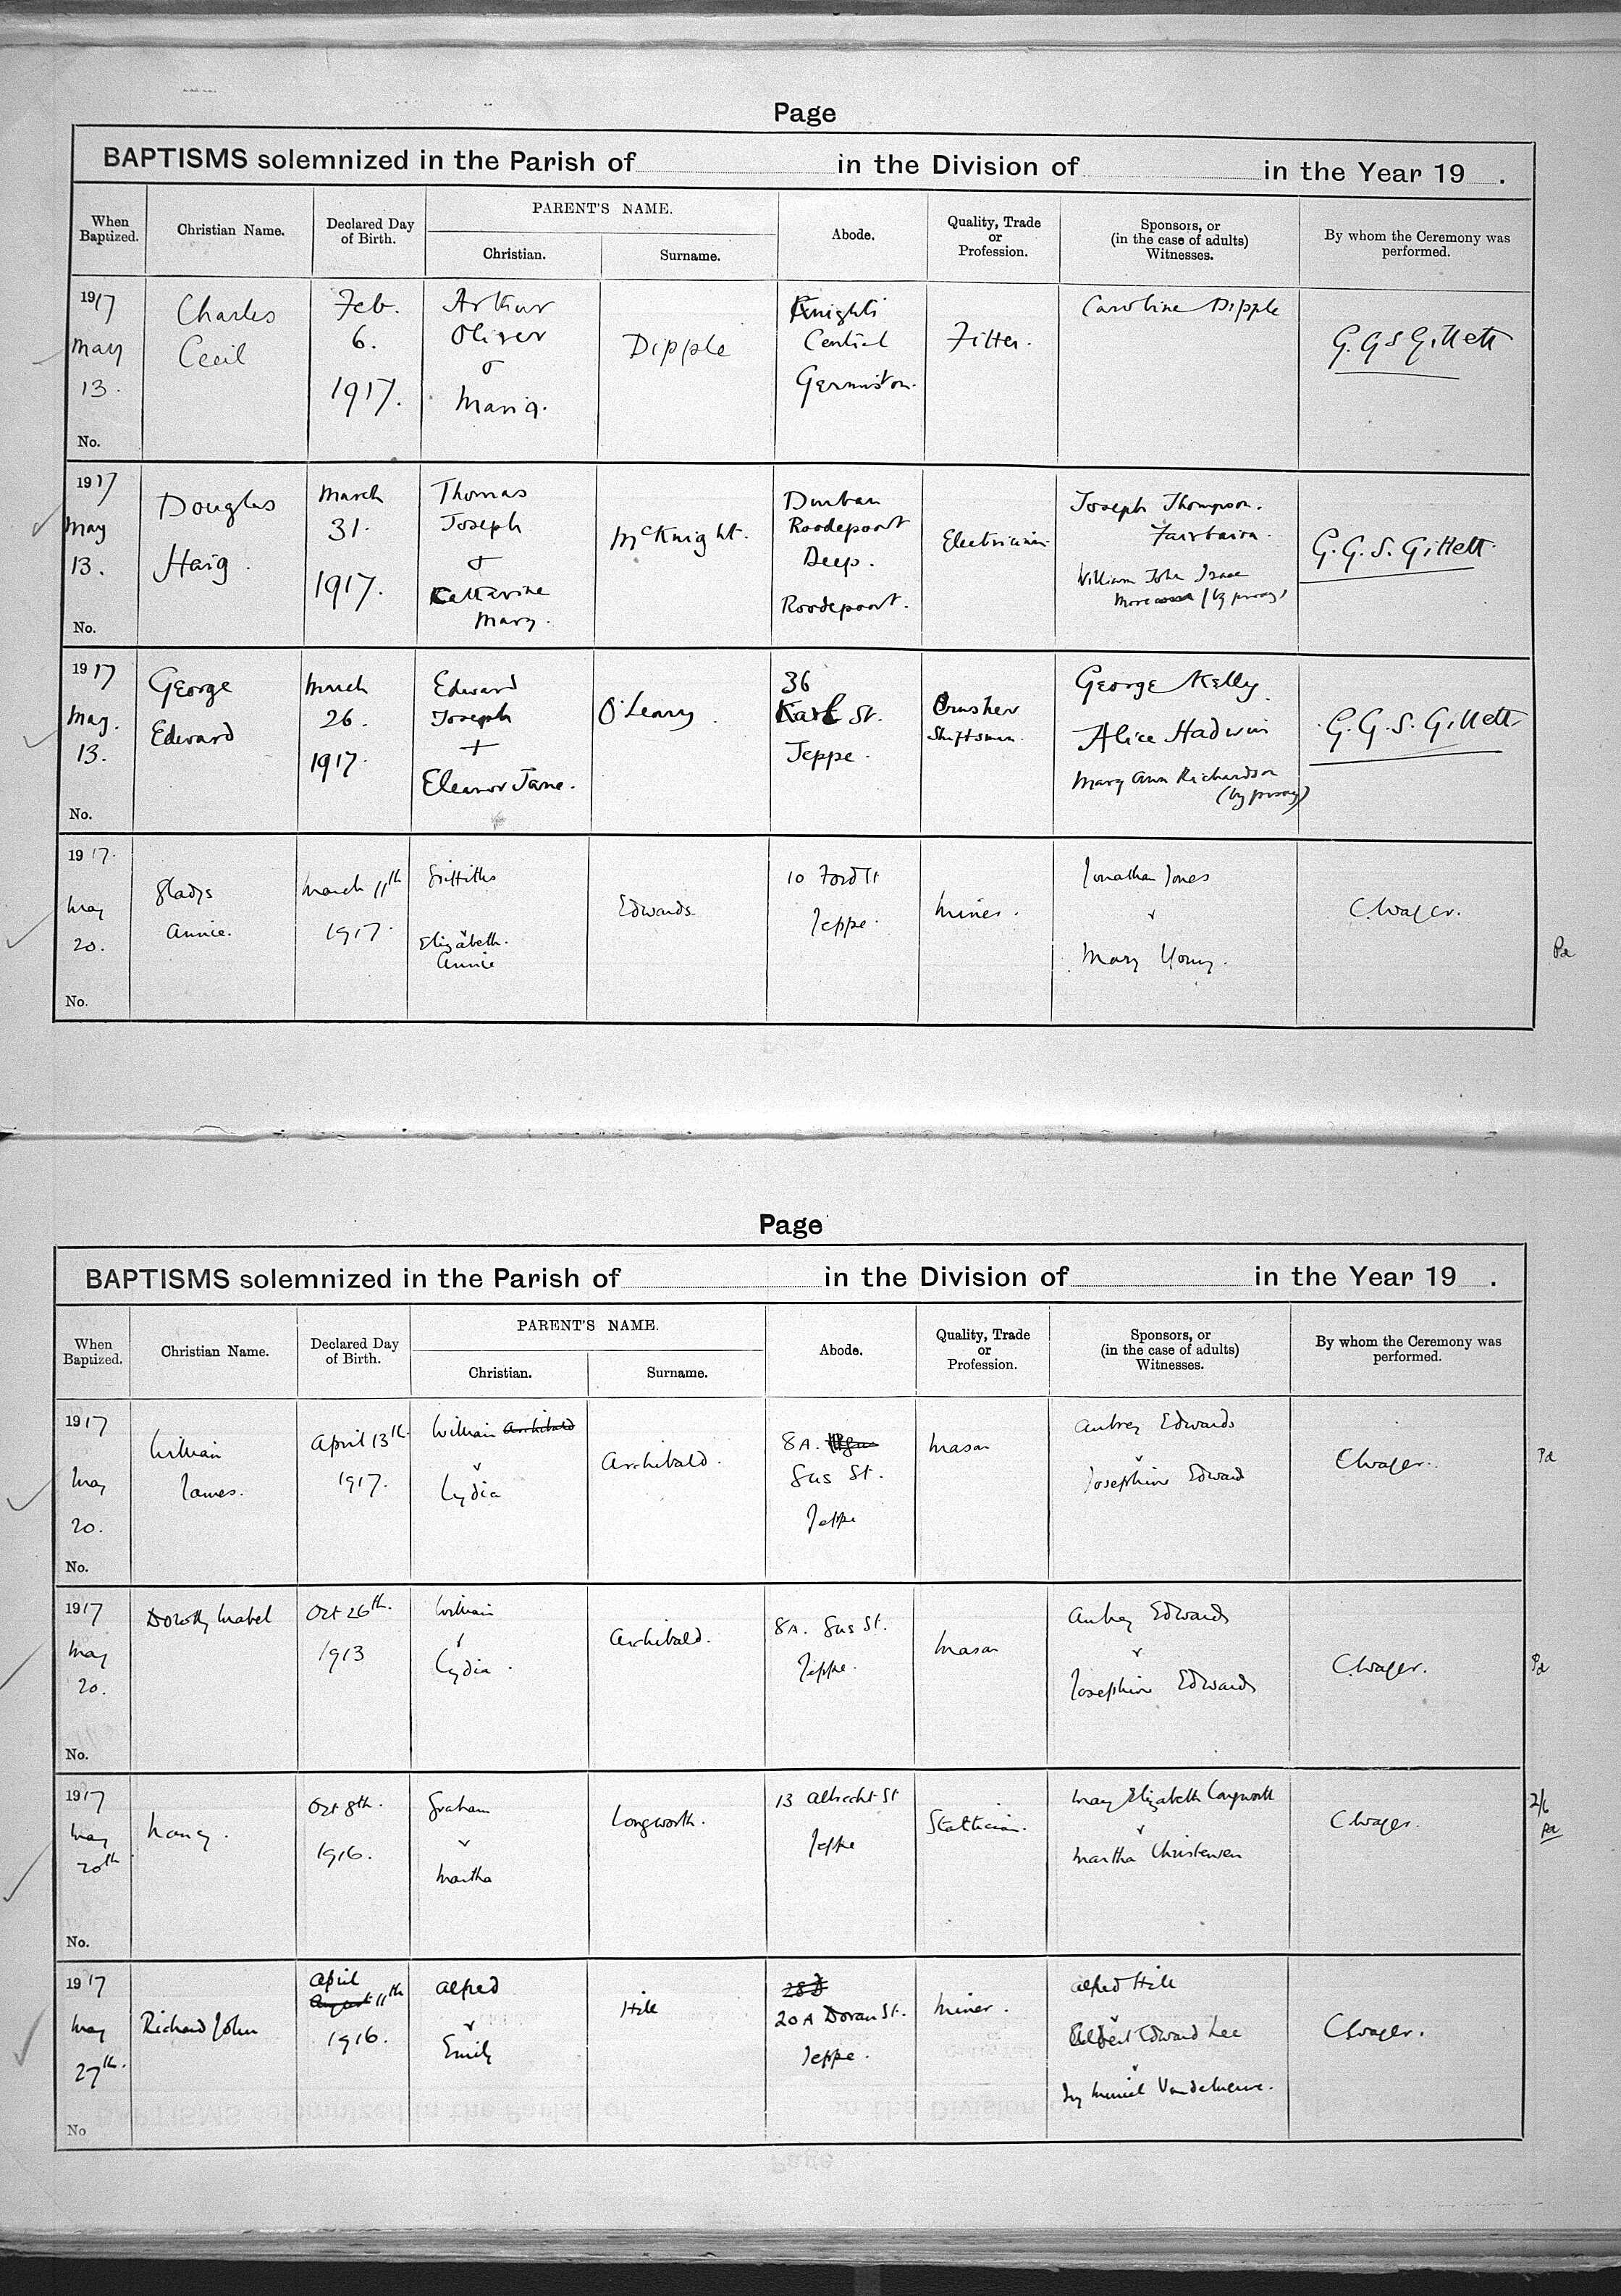 Charles Cecil Dipple's baptism record